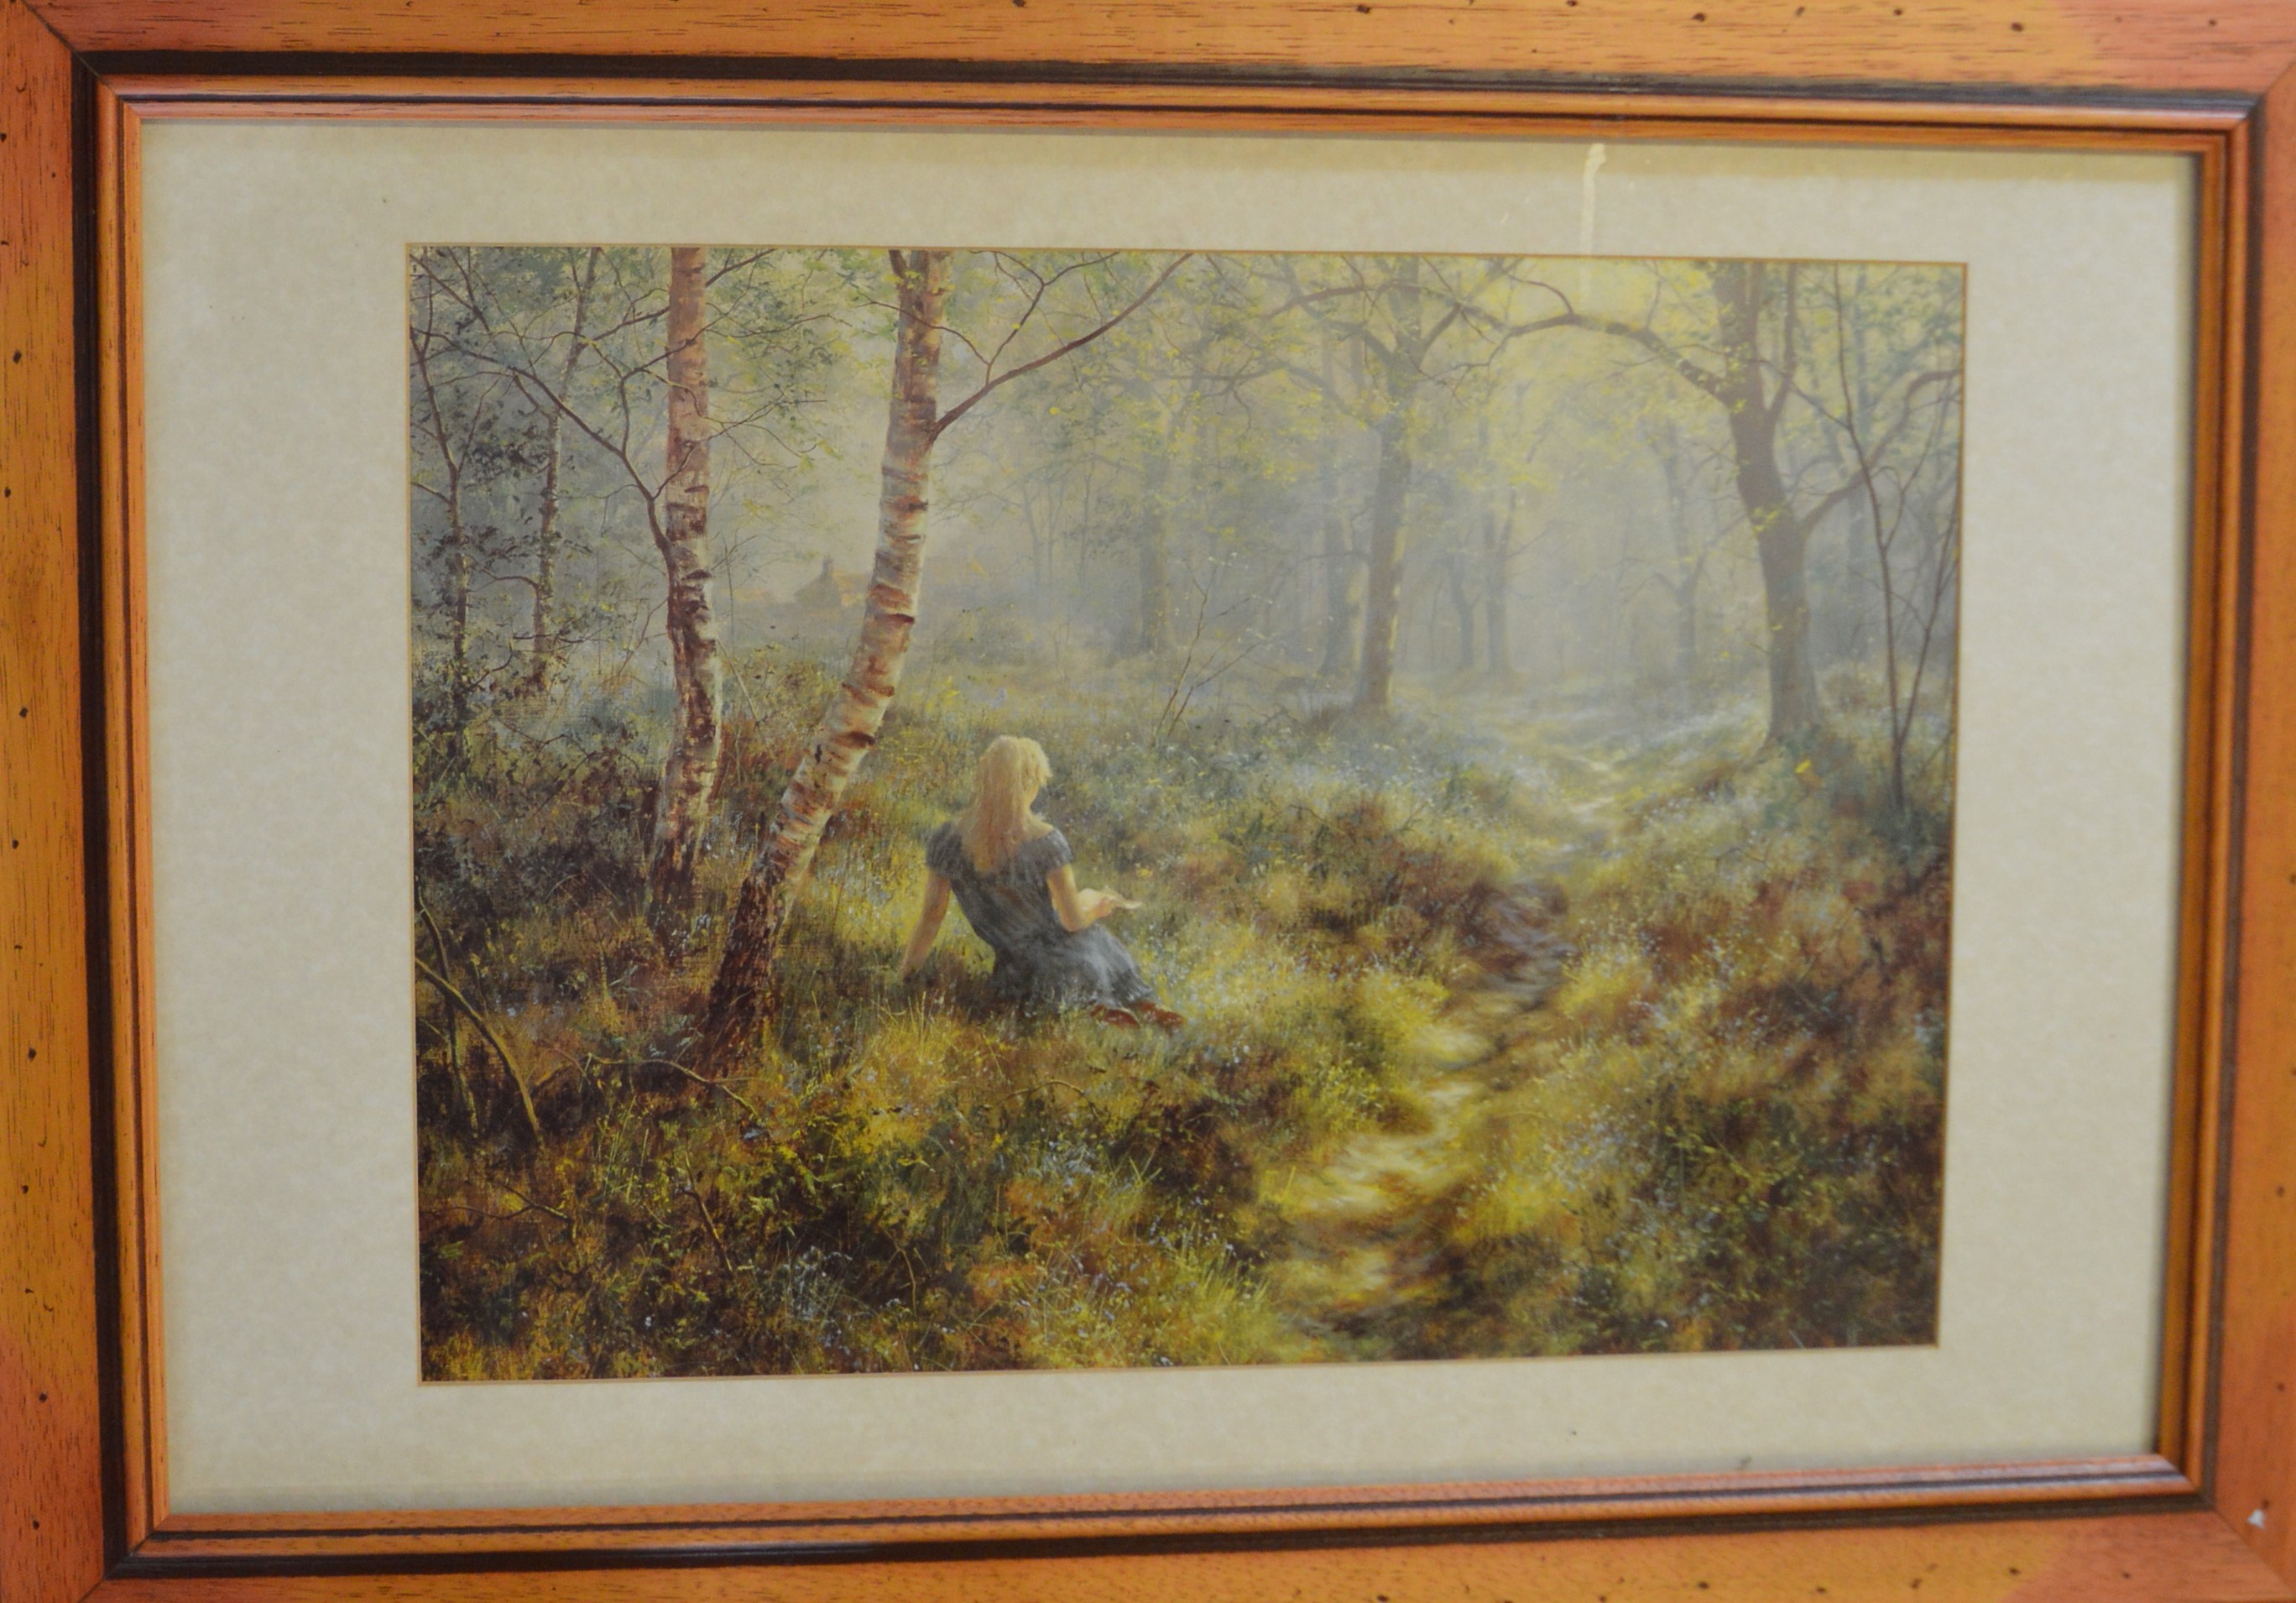 Selection of prints - Girl in the woods, Children picking flowers,  'Morning Mist' pencil signed